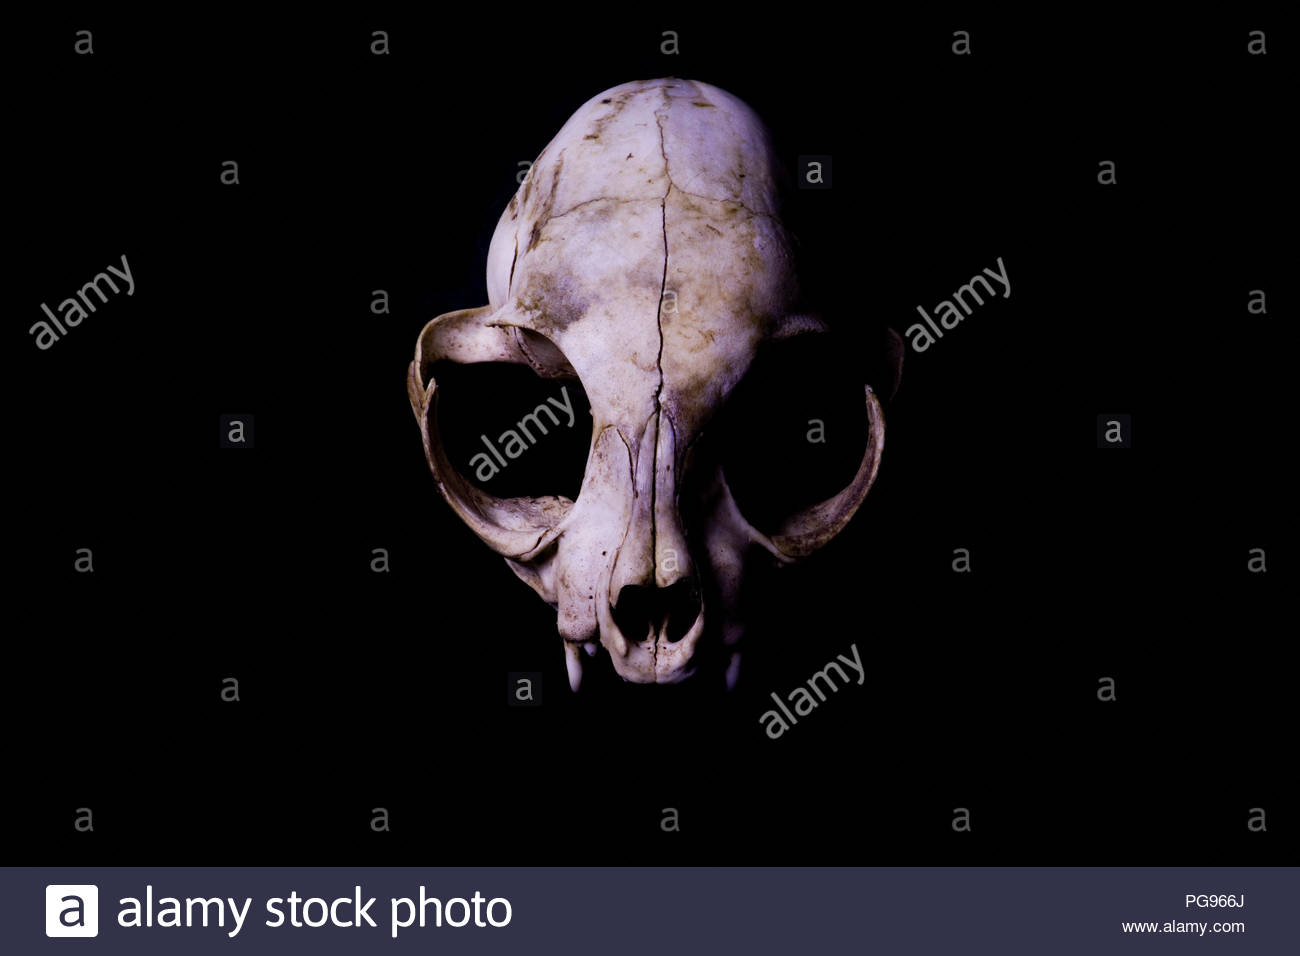 Cat Skull Isolated On Black Background High Contrast Animal